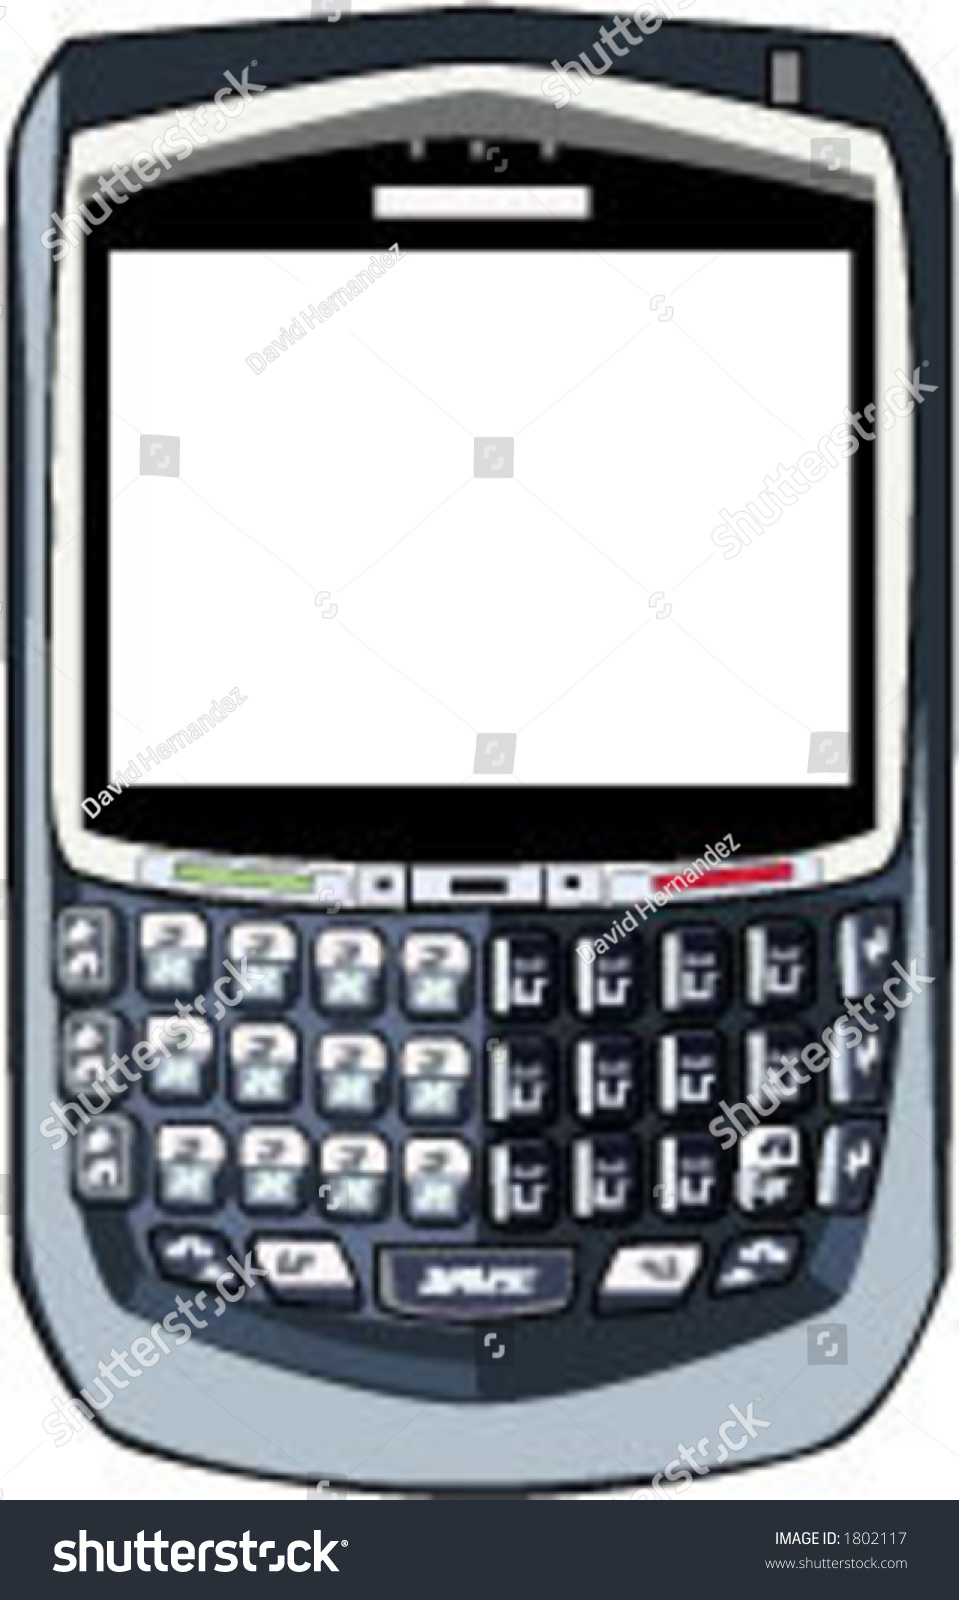 clipart for blackberry phone - photo #10